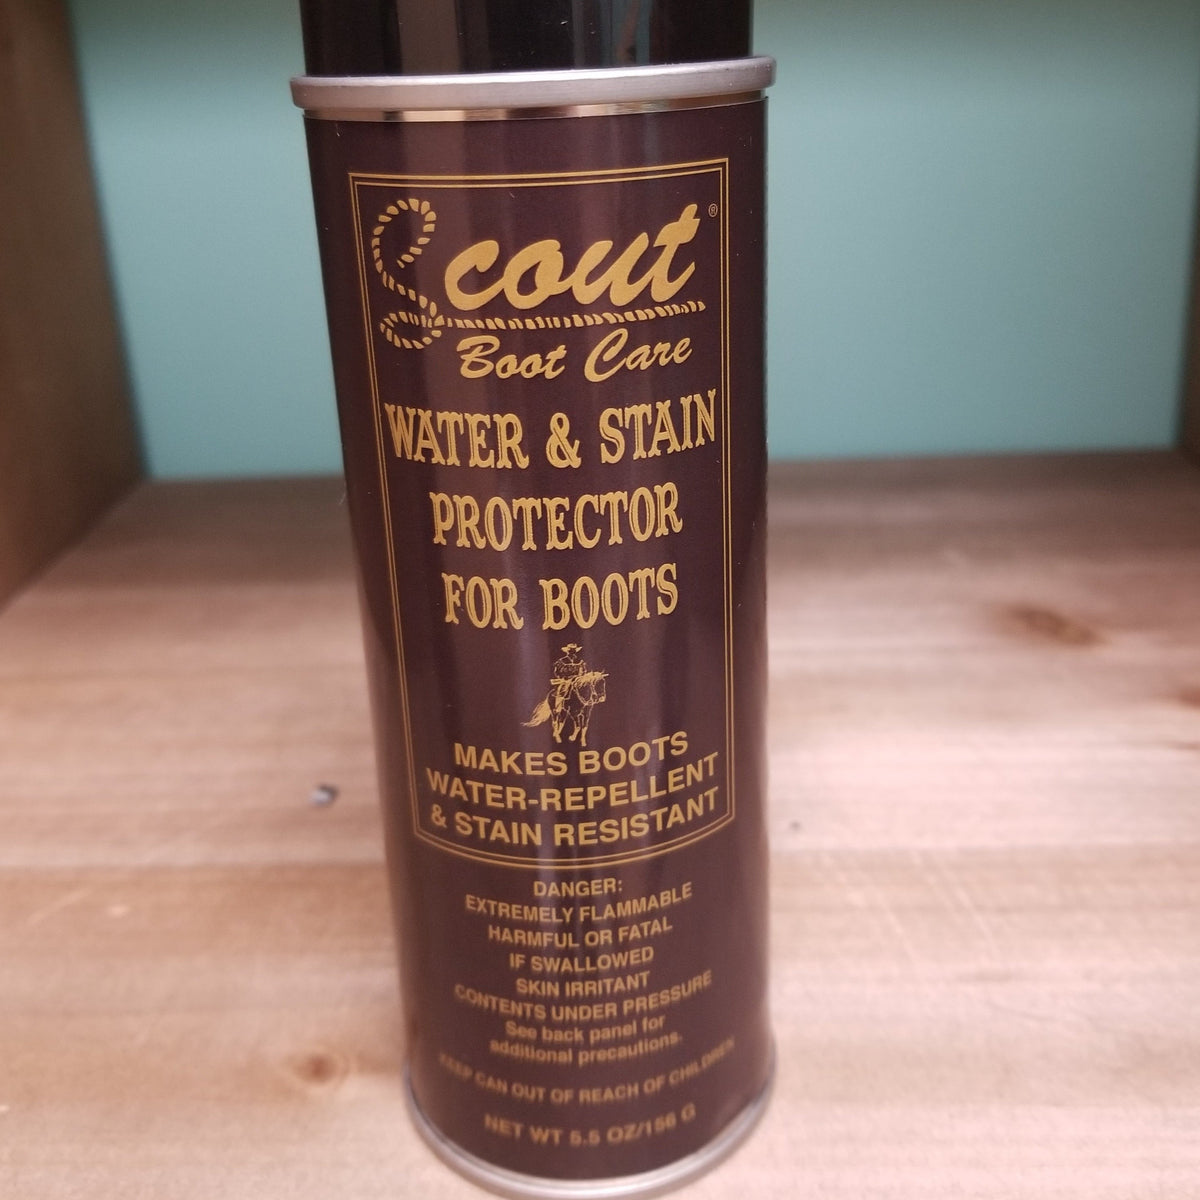 Scout Water and Stain Protector For Boots- Aerosol Spray